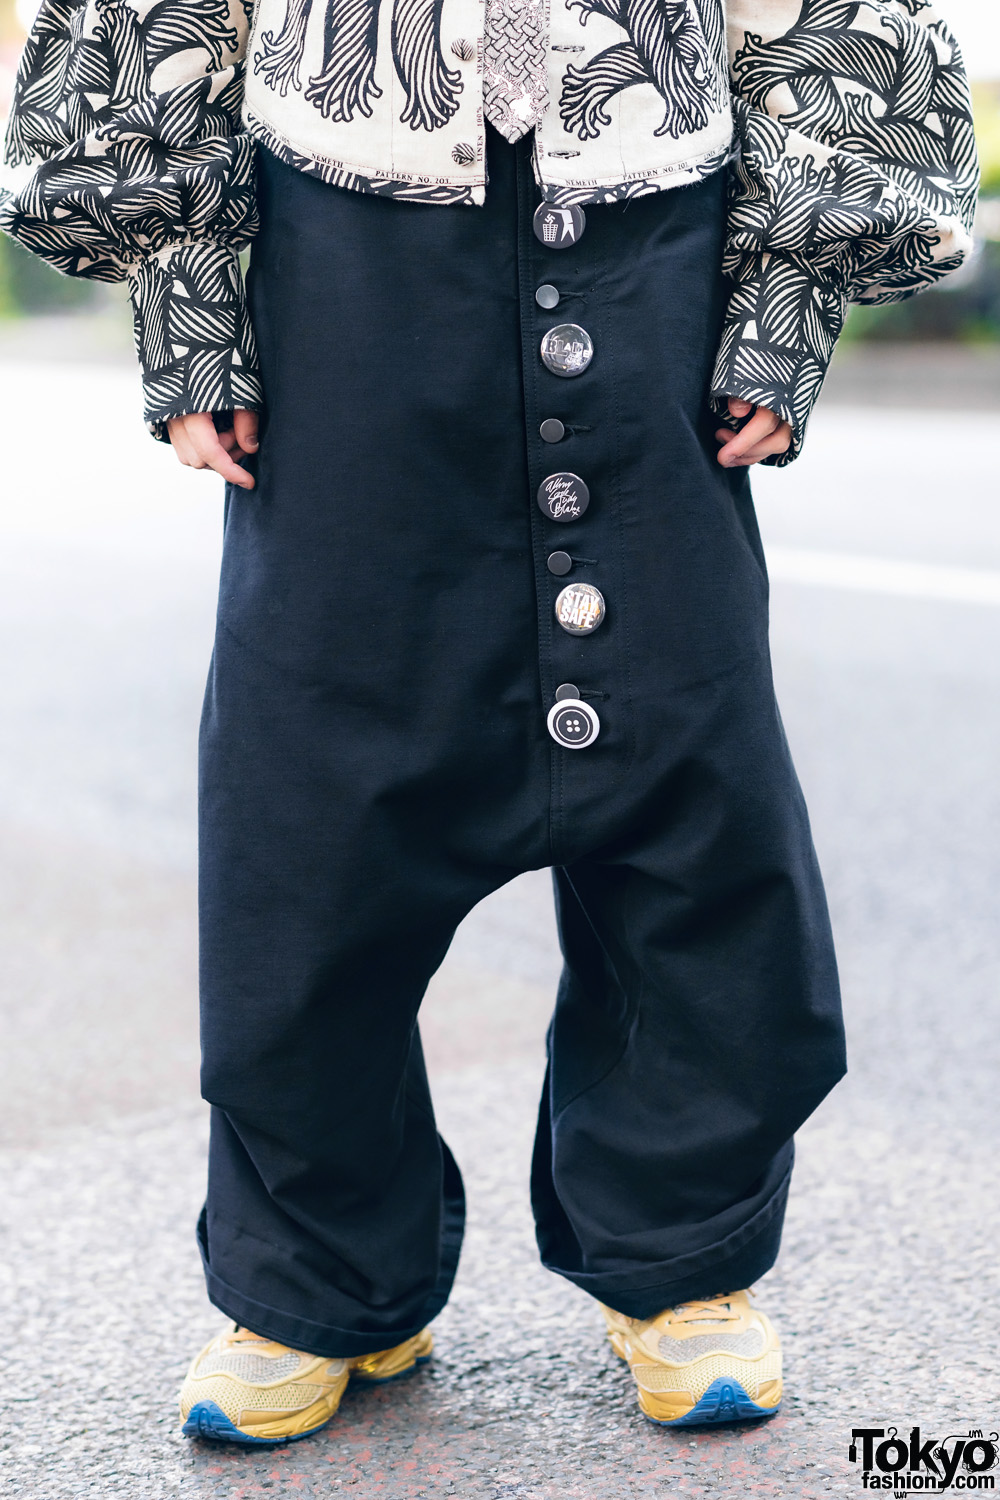 Christopher Nemeth Rope Print Fashion in Harajuku w/ Beret, Layered Tops,  Wide Leg Shorts & Leather Shoes